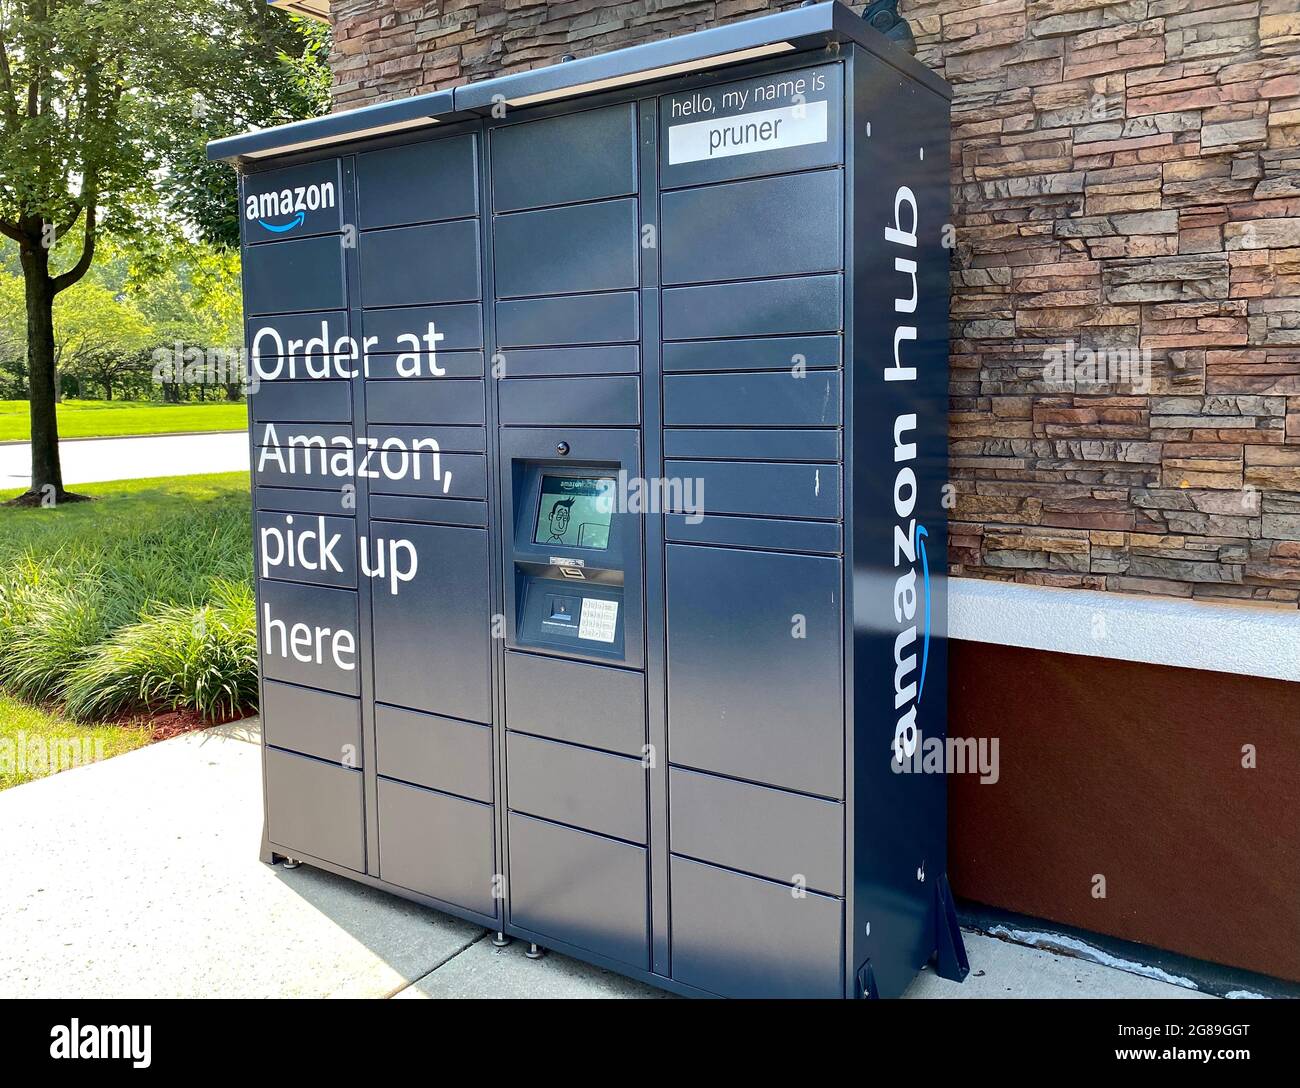 Delivery Hub High Resolution Stock Photography and Images - Alamy